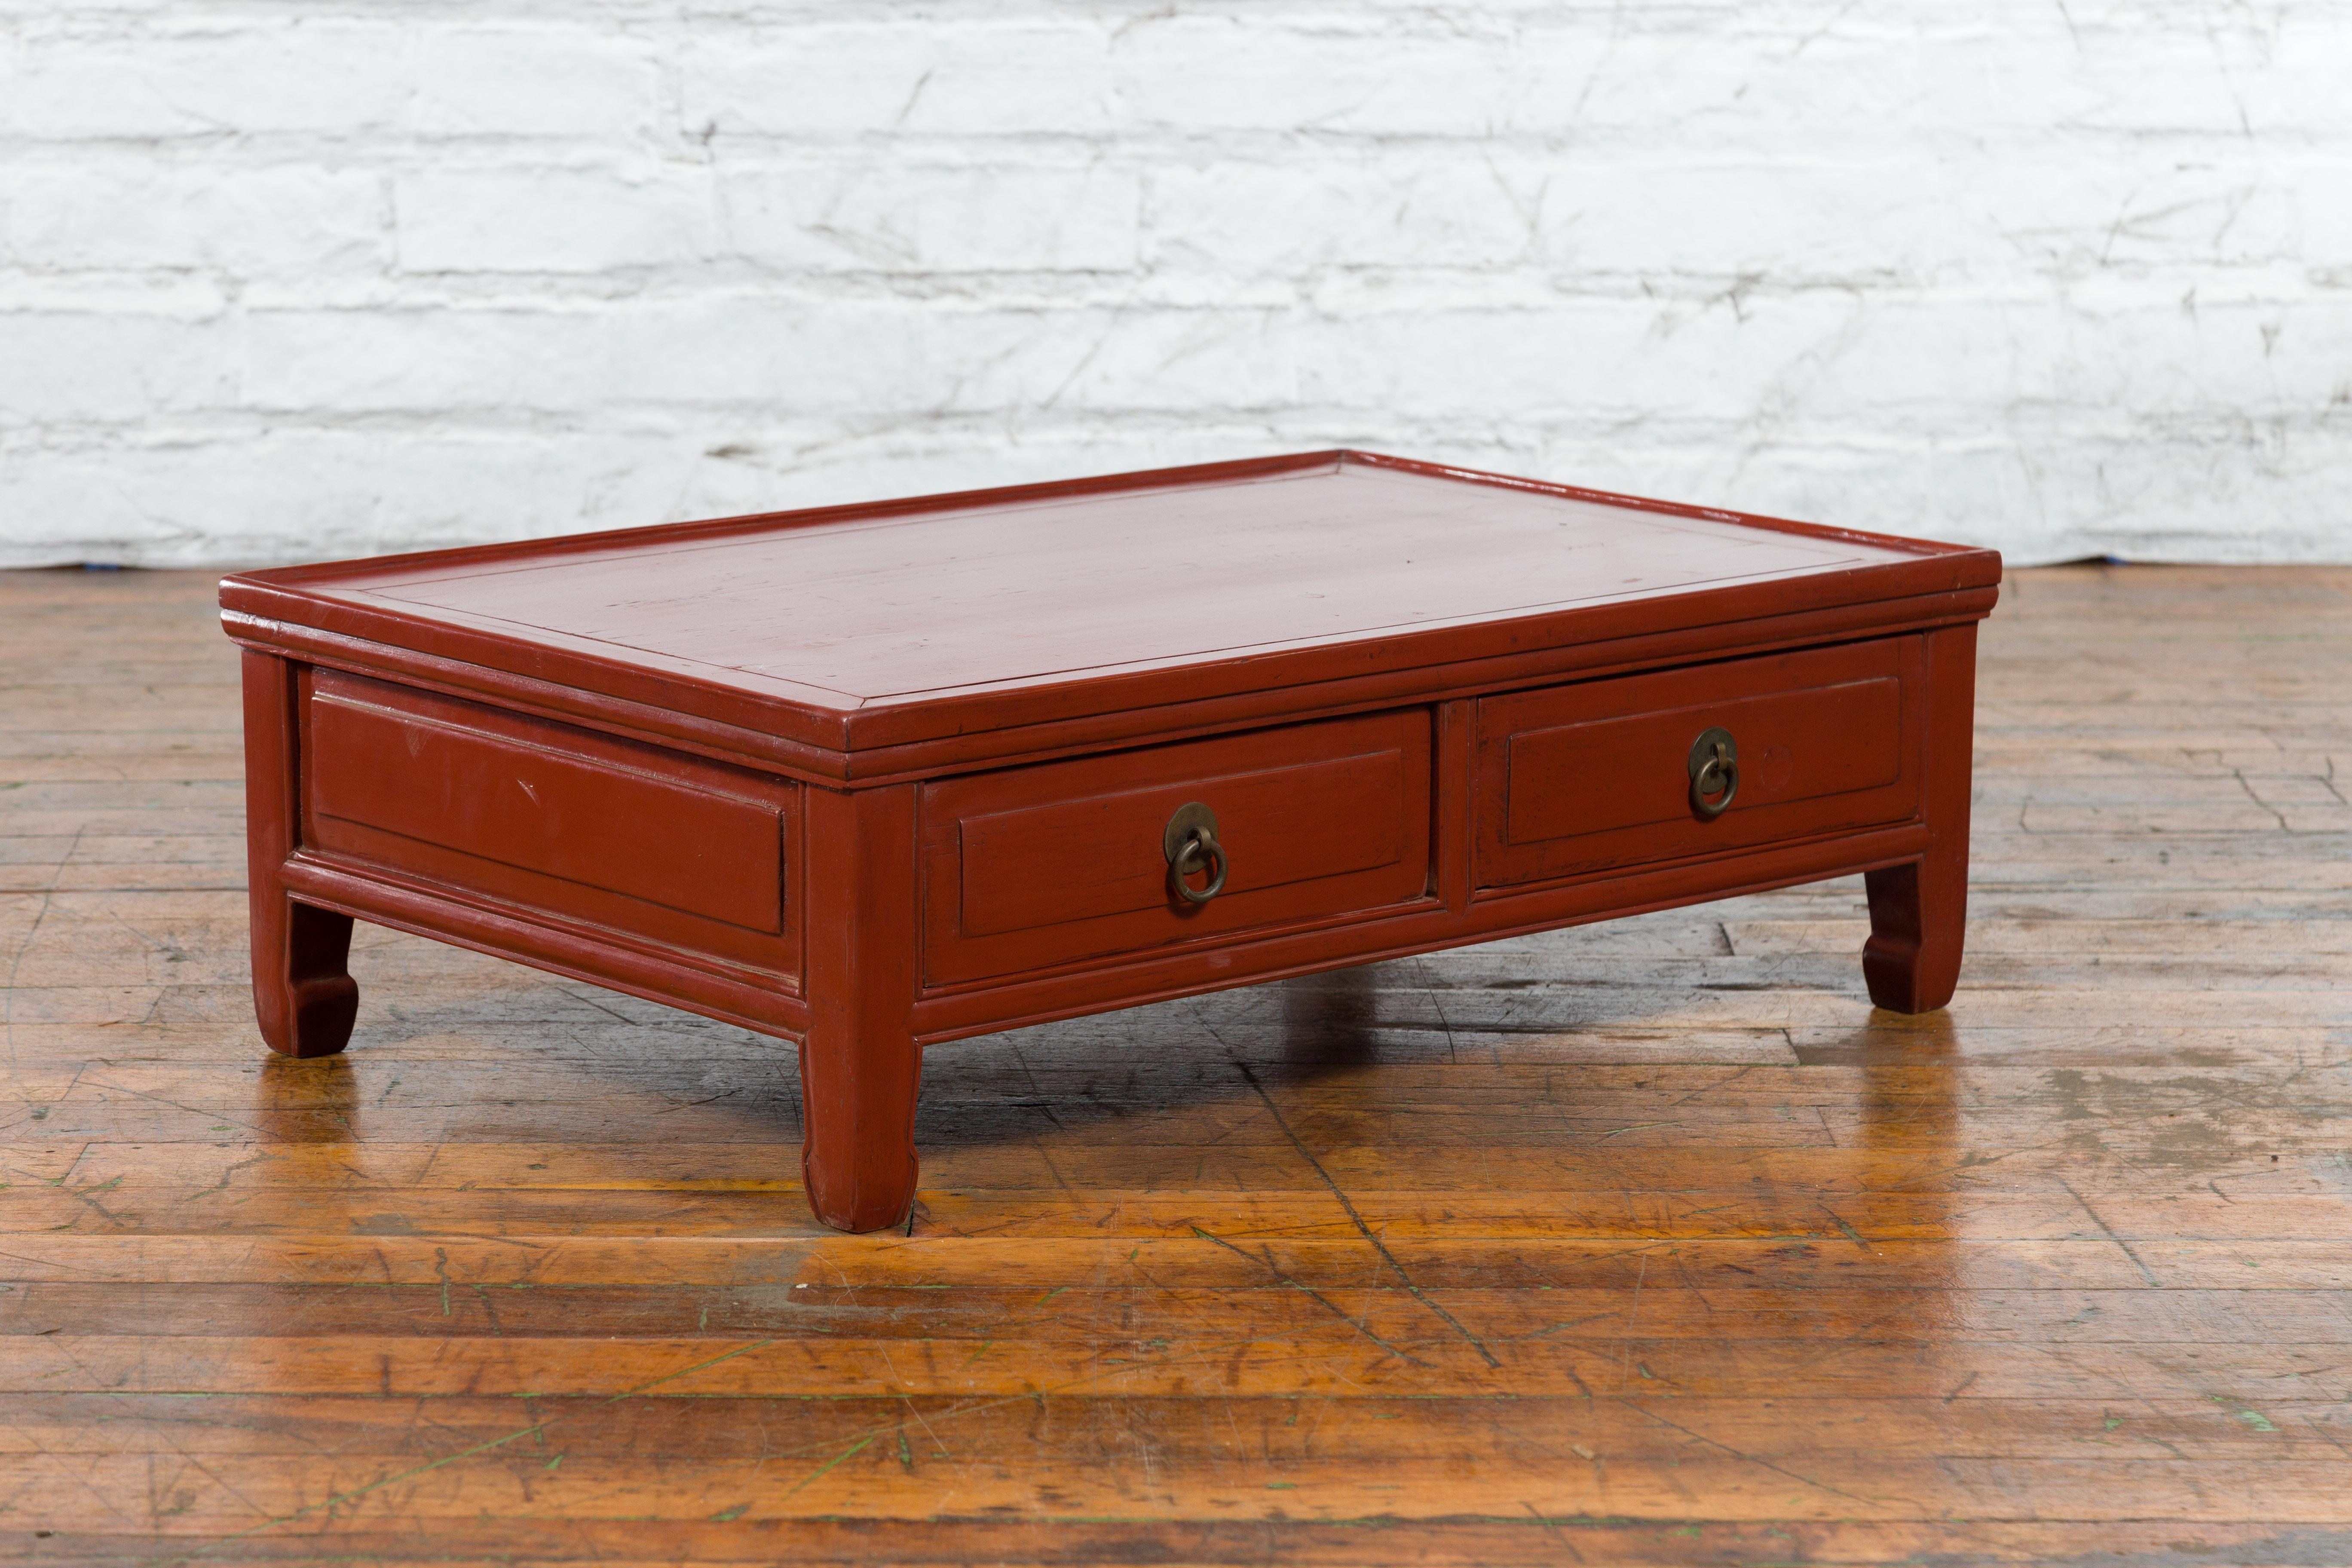 Qing Dynasty Red Lacquer Low Kang Coffee Table with Drawers and Horse Hoof Feet For Sale 1